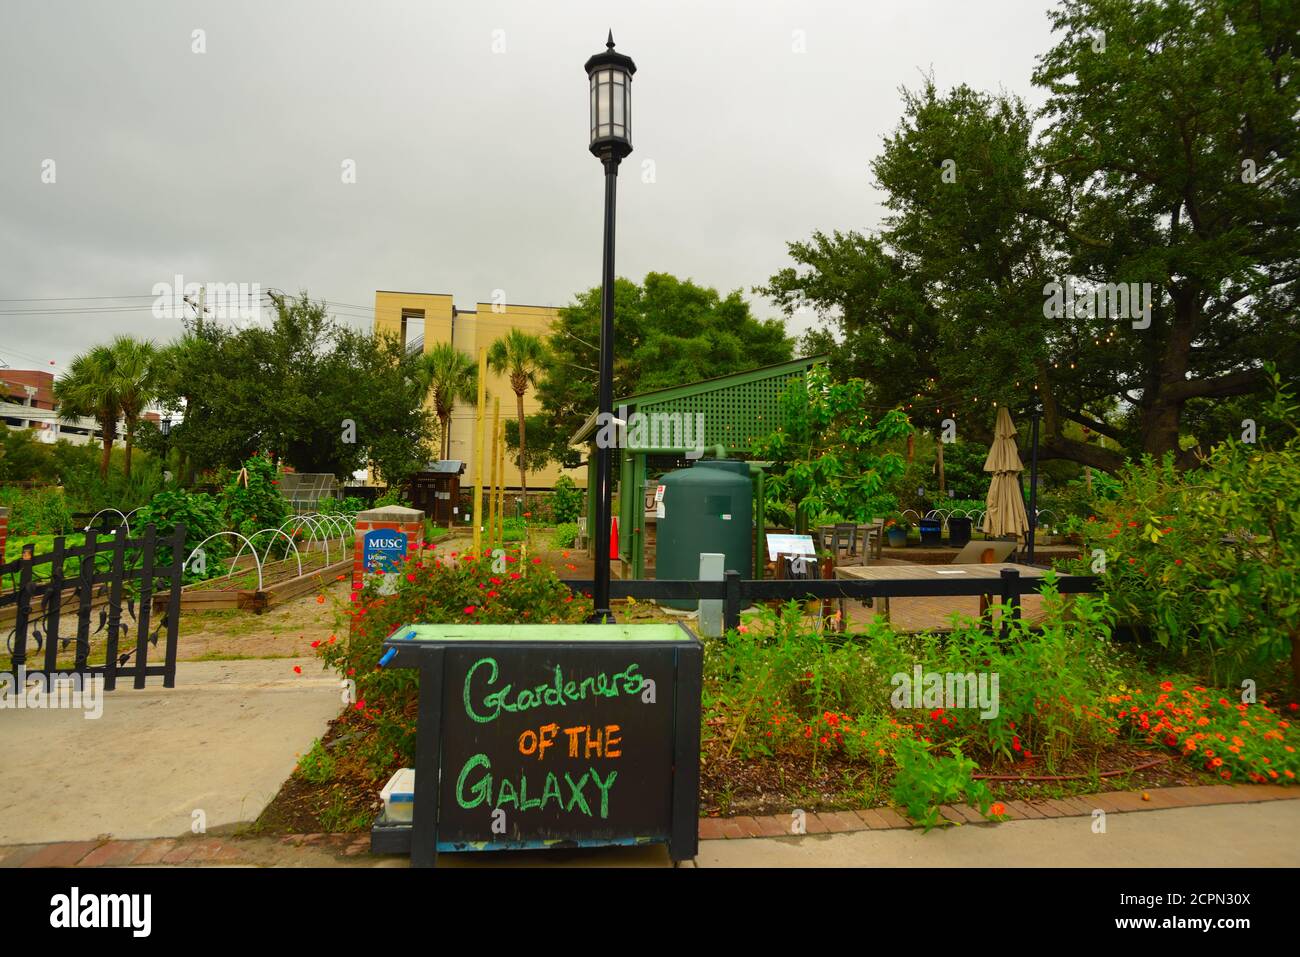 Ever Changing Urban Garden with Good Weather, New Growth, New Attractive Displays and Growths, including Decorated Cabinet with Amish Style Flowers. Stock Photo